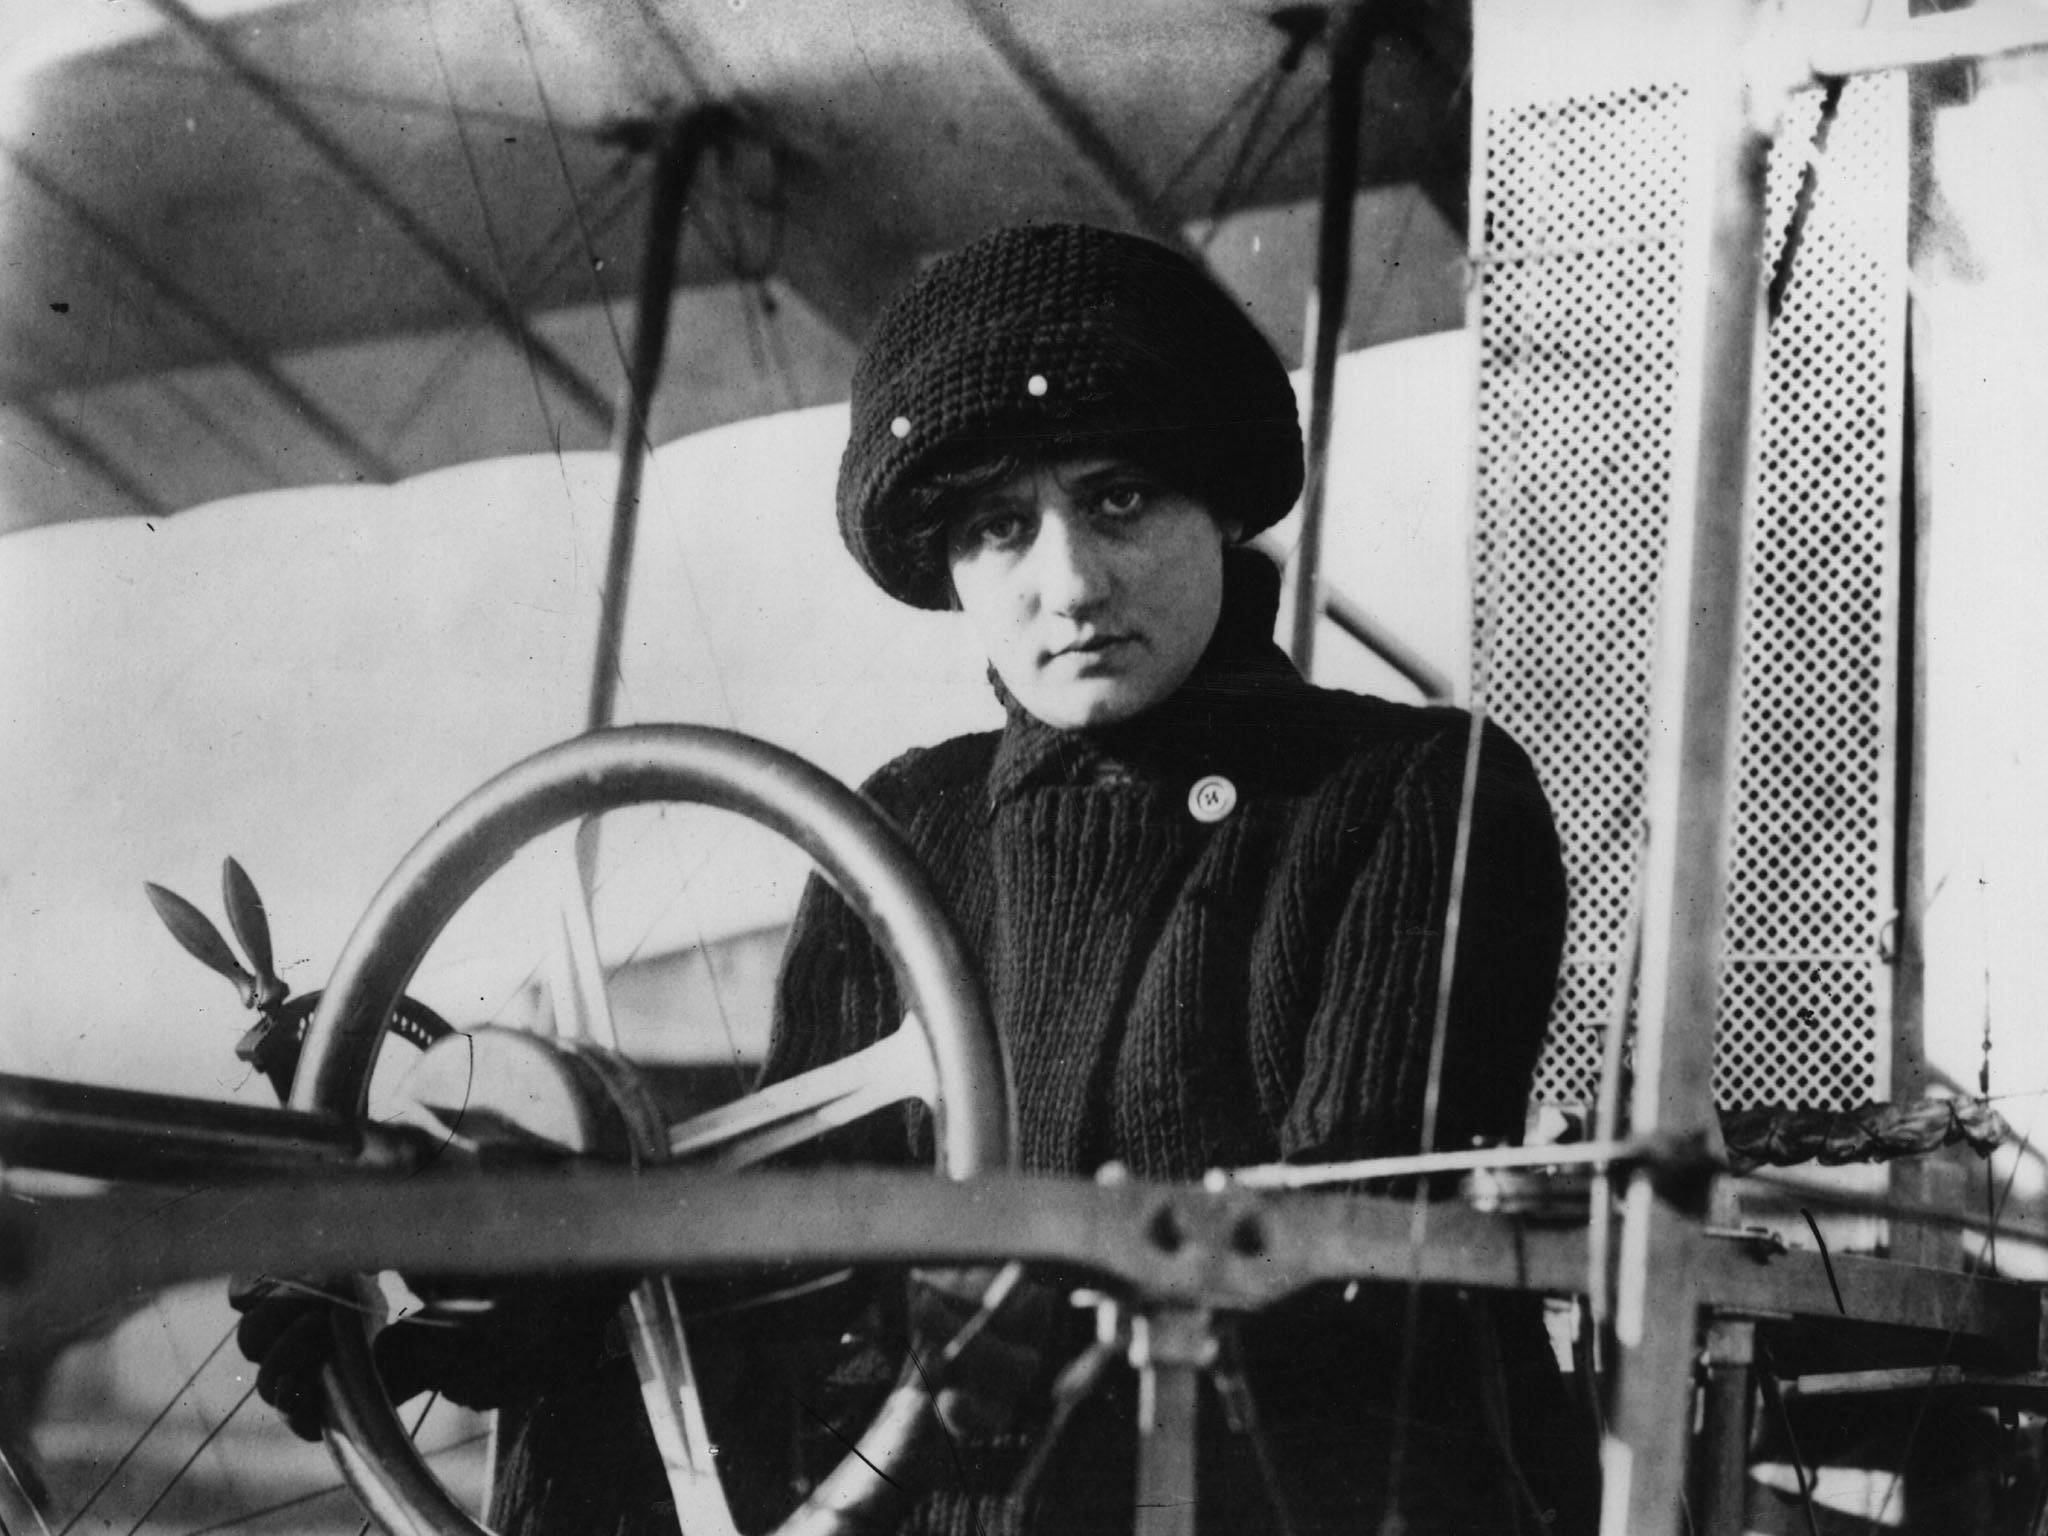 Raymonde de Laroche at the wheel of her plane. She was the first woman to receive a pilot’s licence in 1910